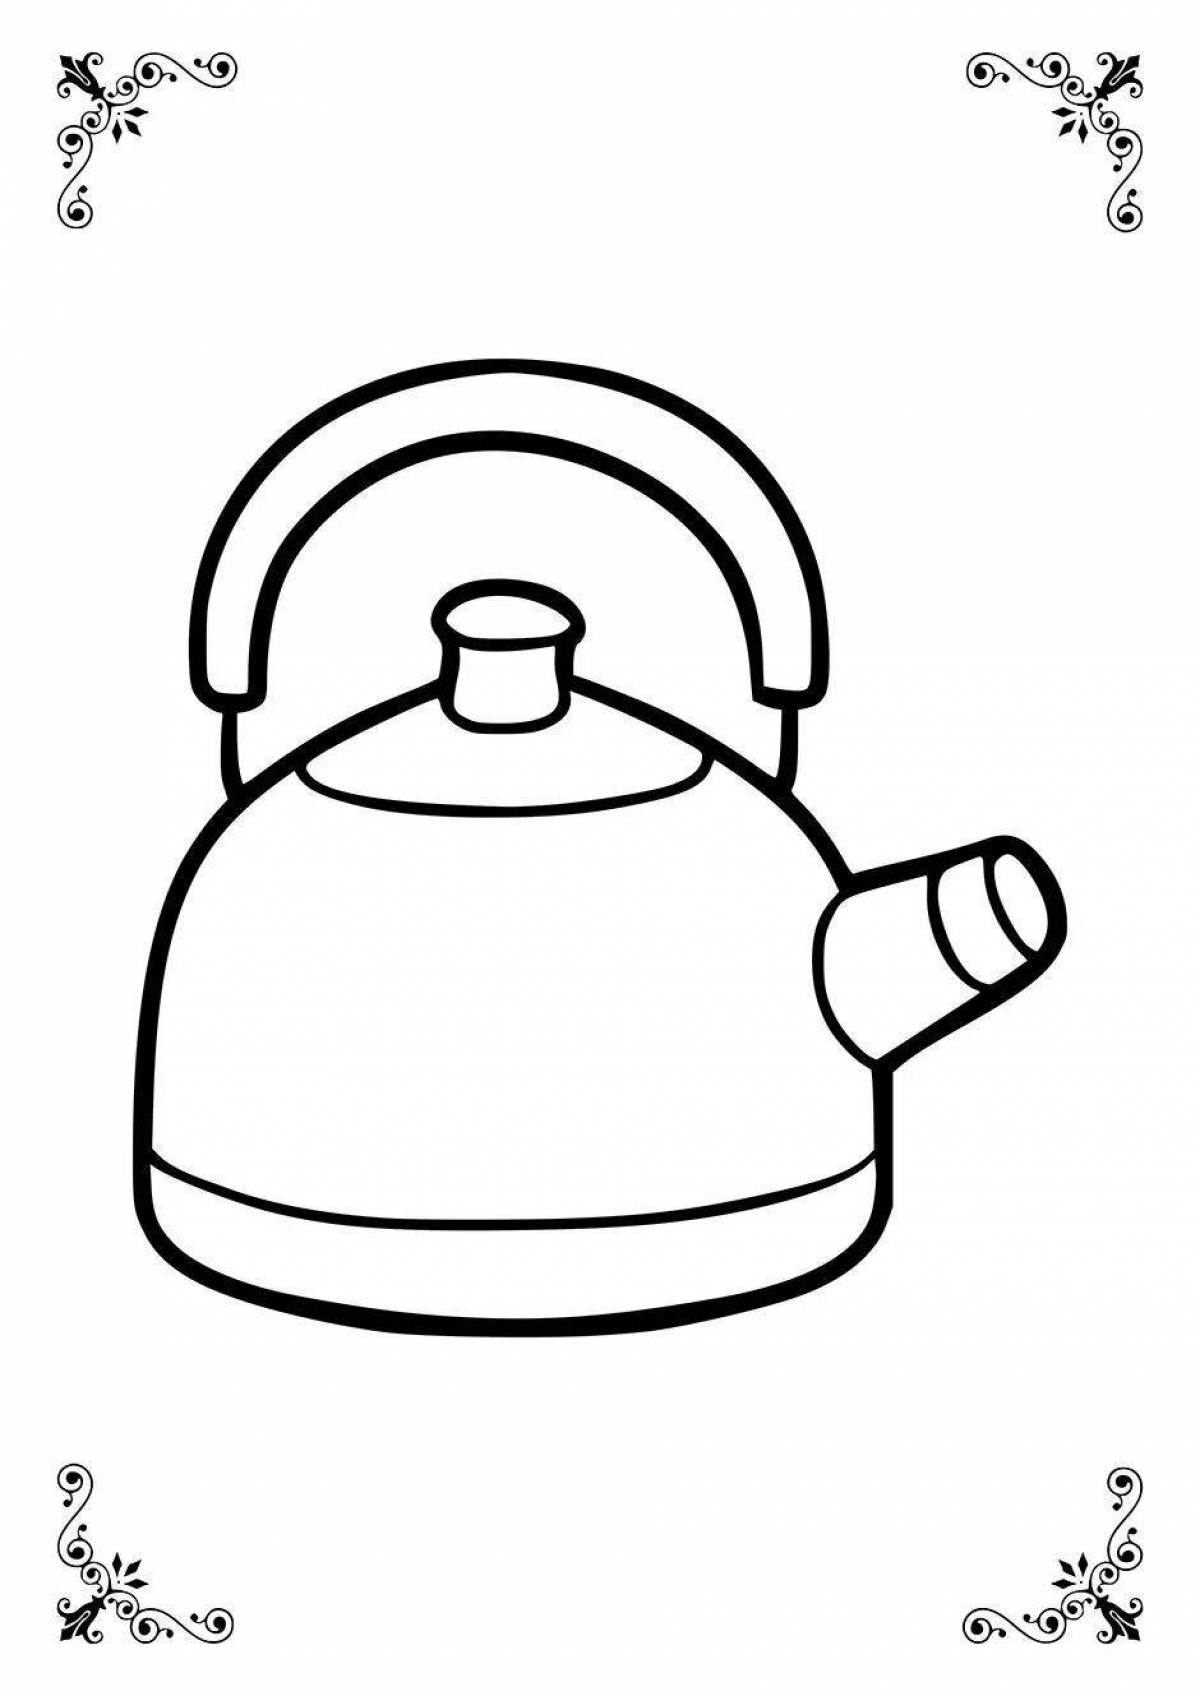 Electric kettle #6